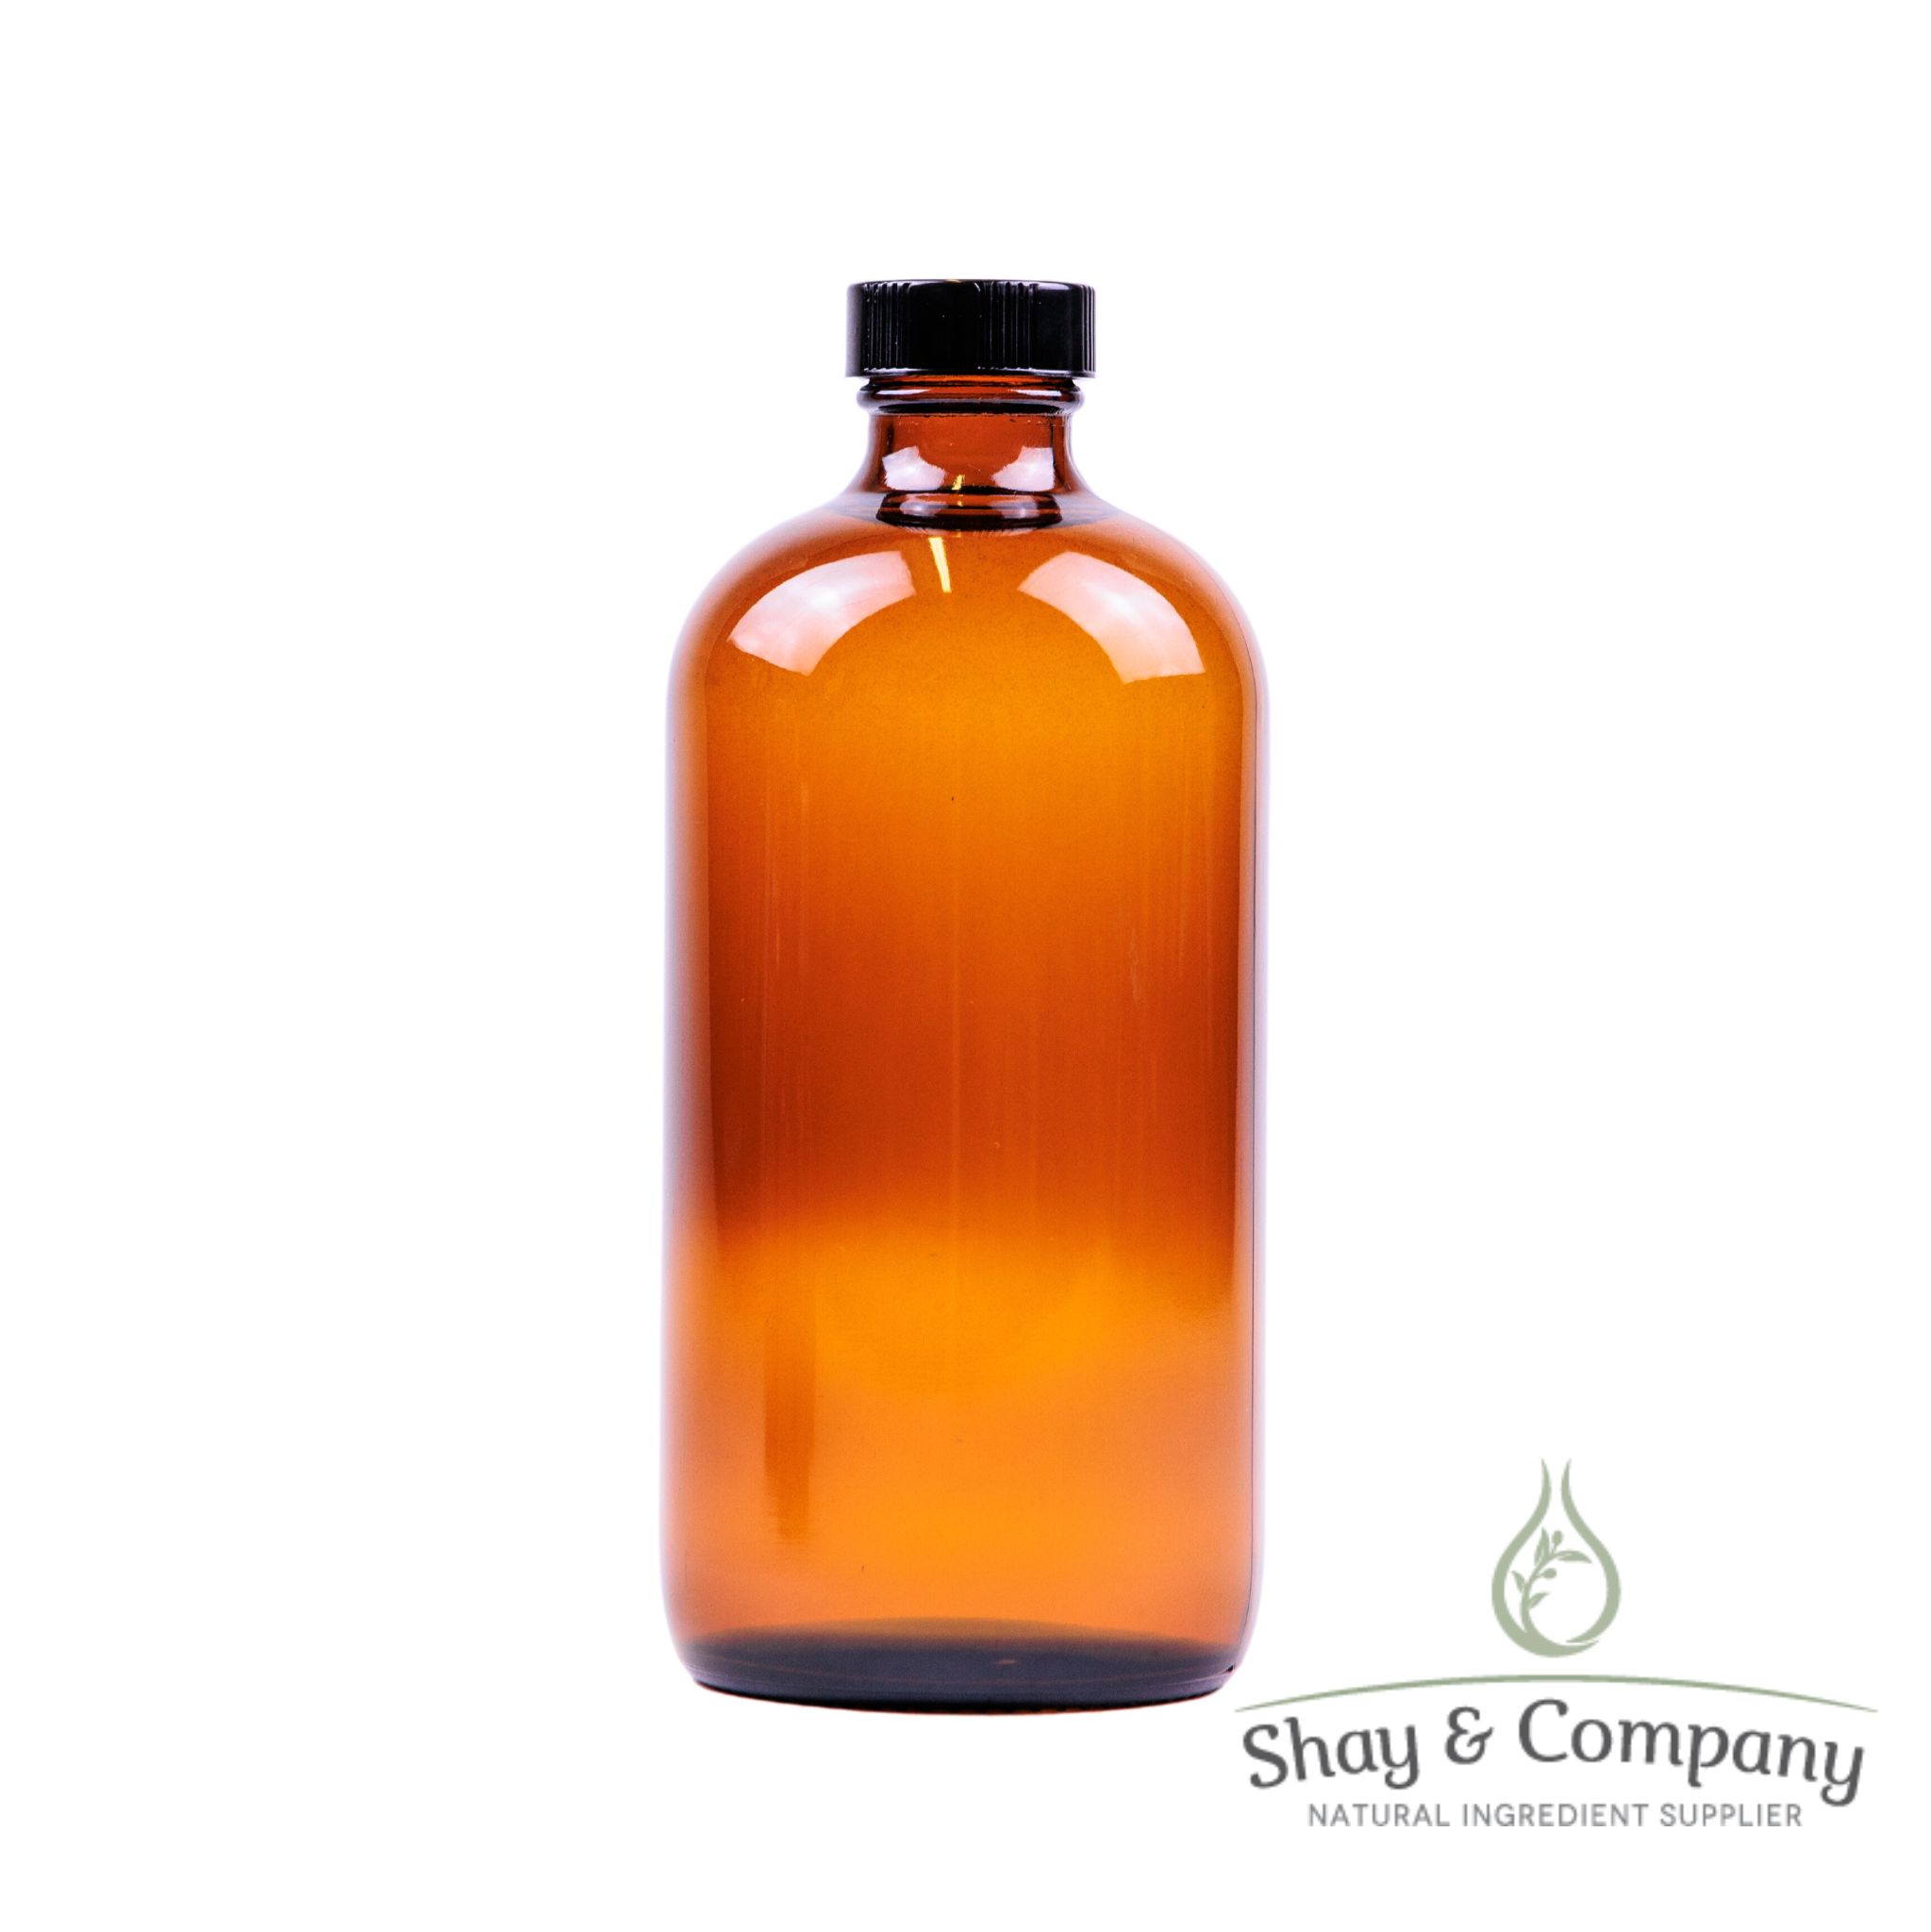 https://shayandcompany.com/wp-content/uploads/2018/09/packaging-8oz-amber-glass-bottle-with-black-lid.jpg